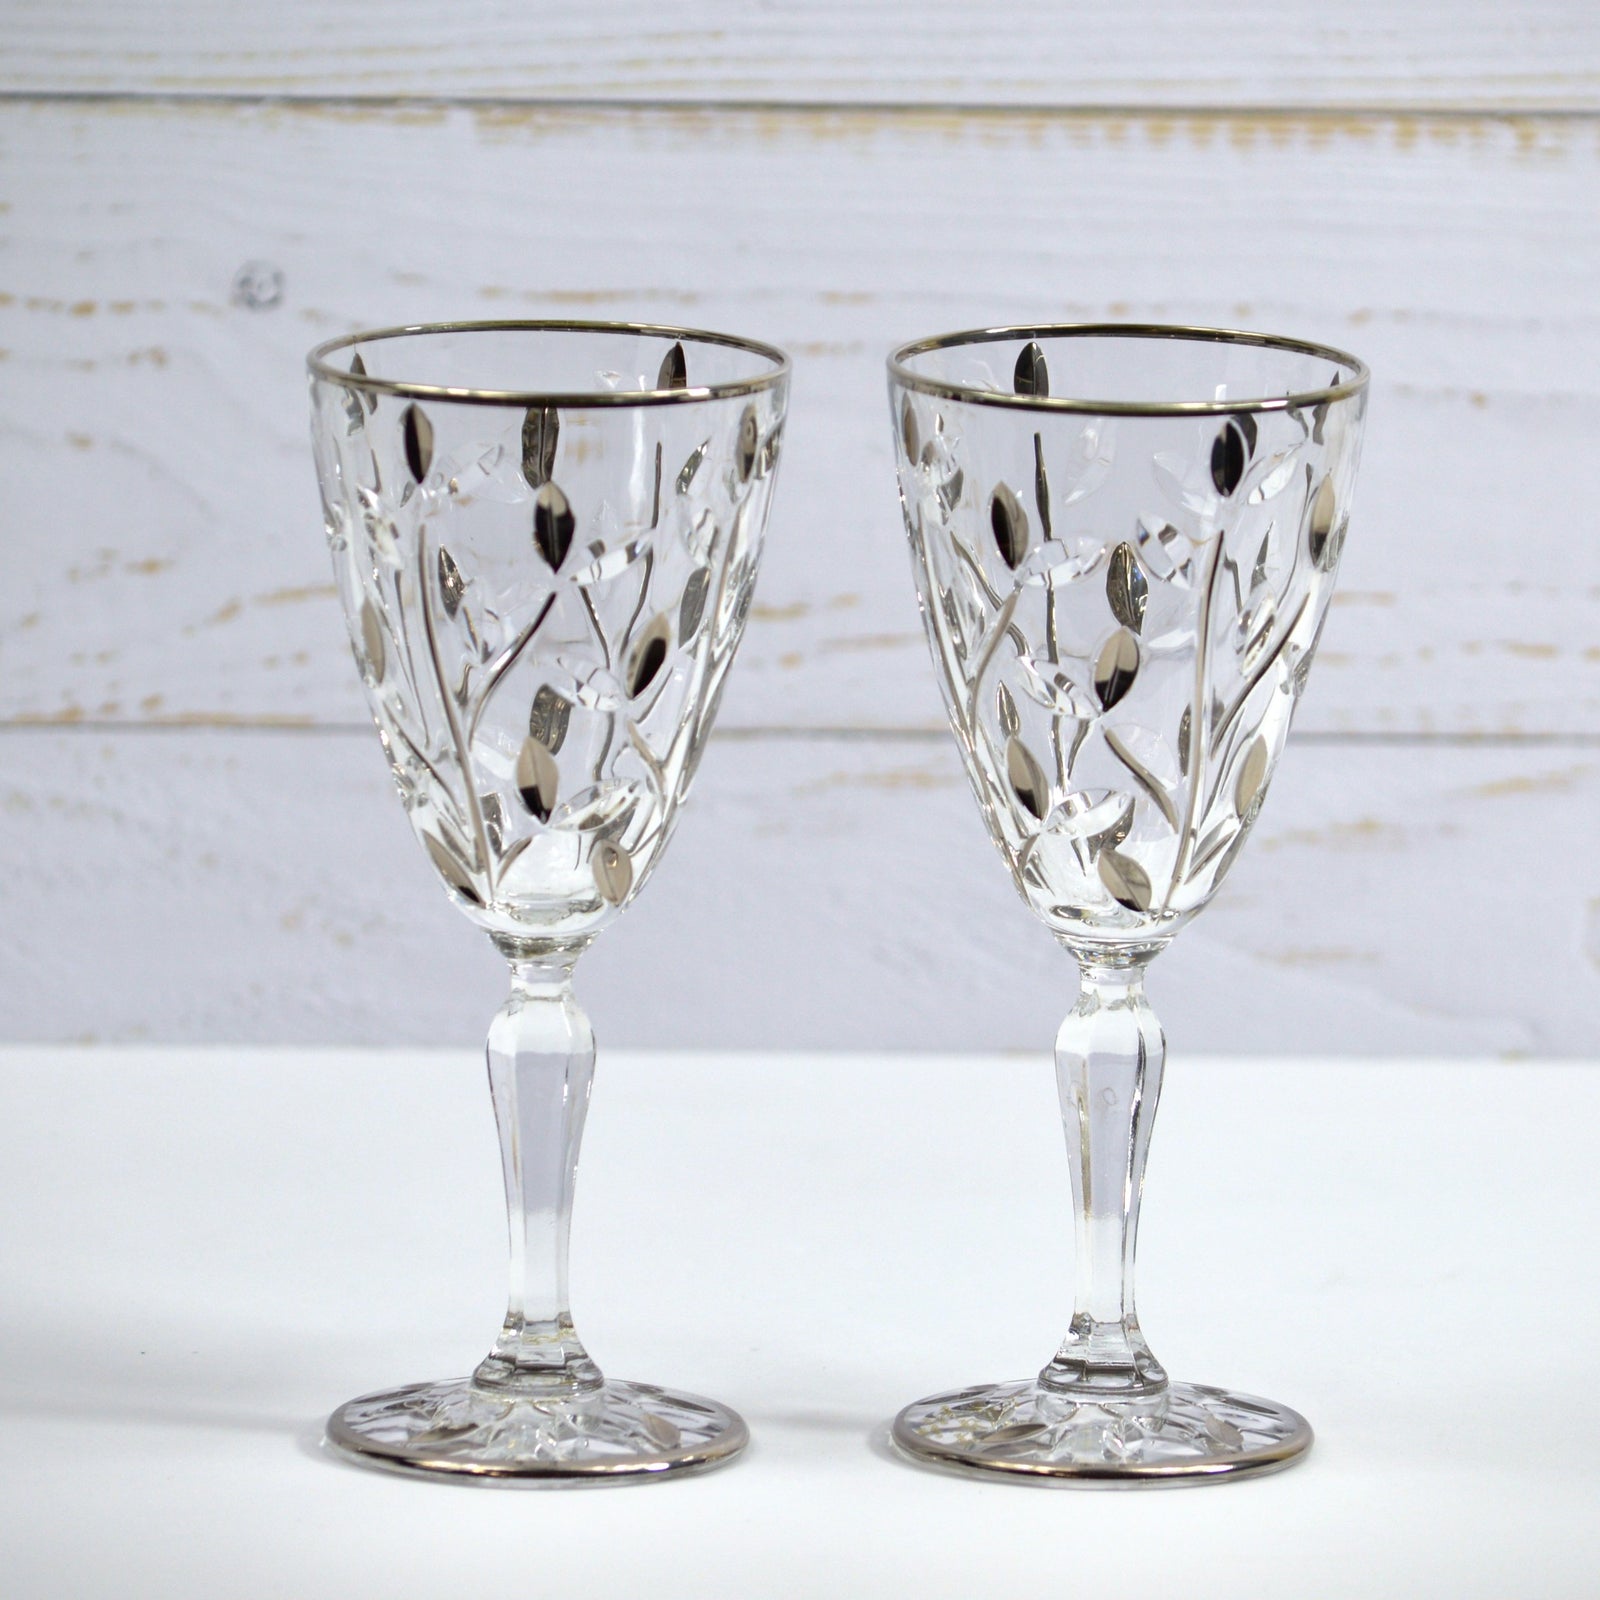 2 Vintage 1950s Italian Champagne Glasses Etched Crystal Martini